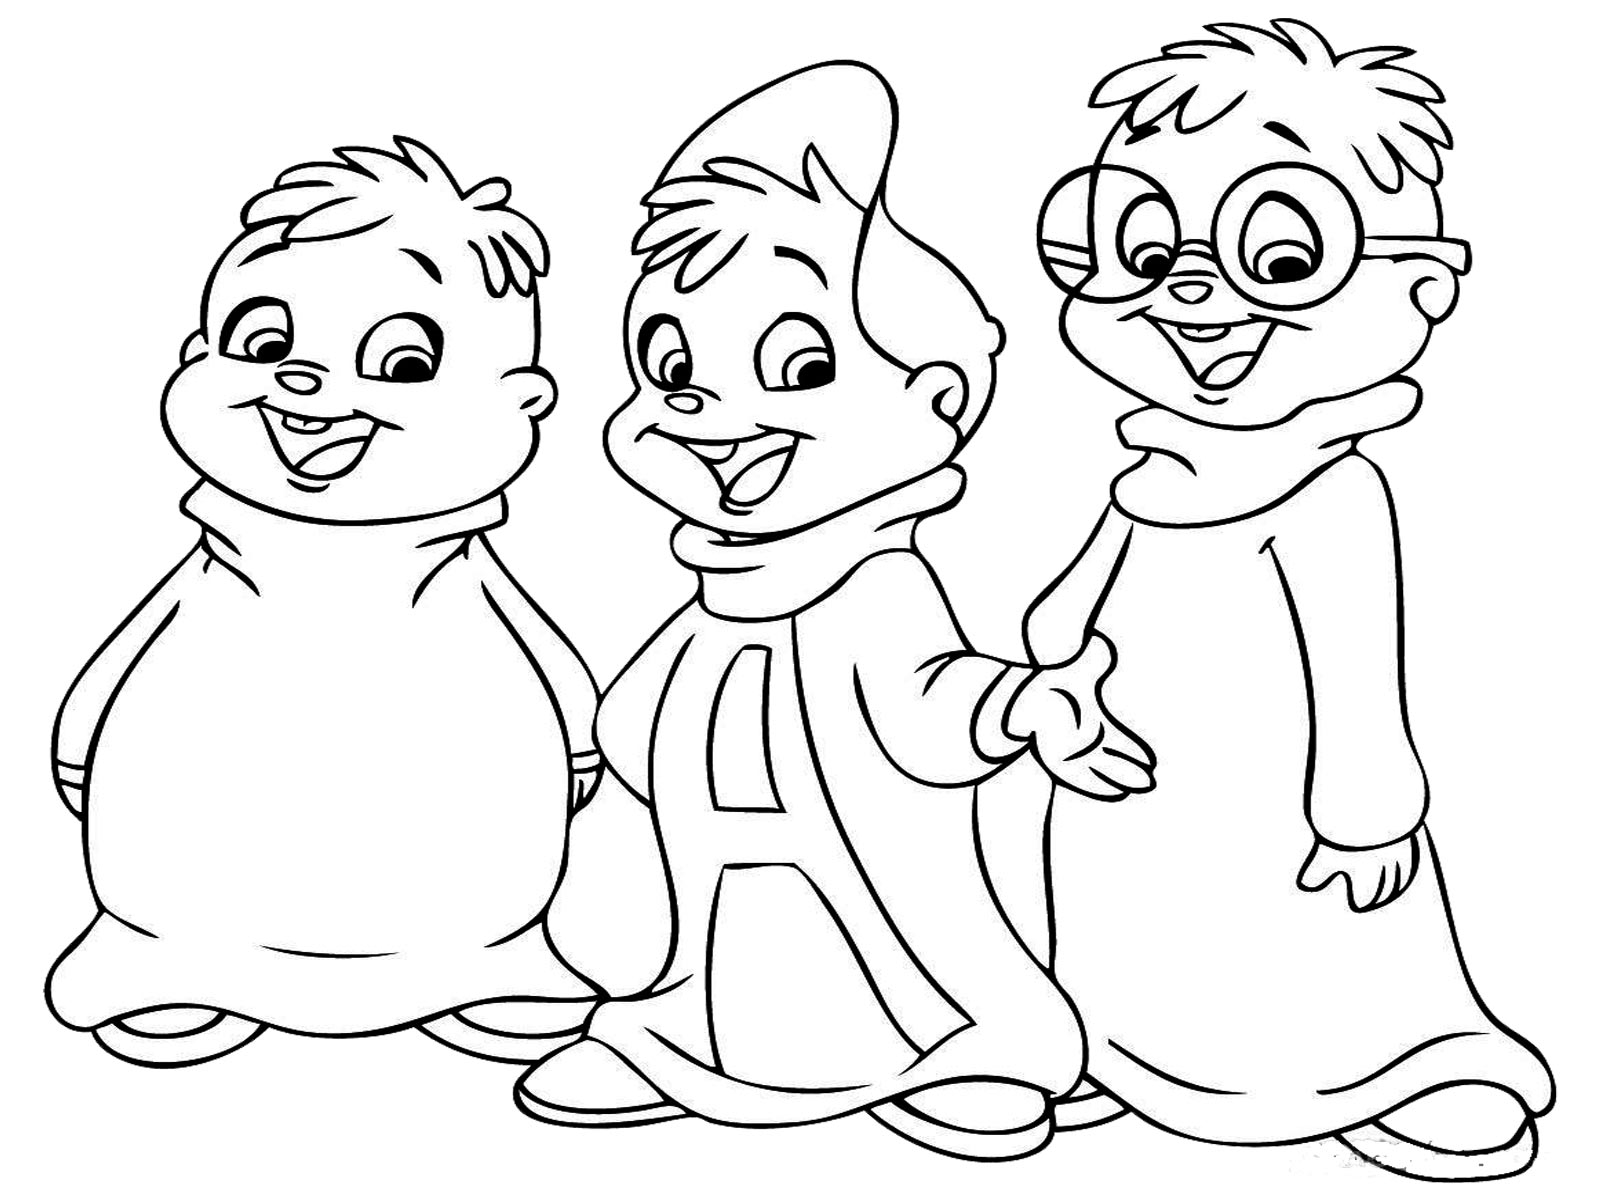 Chipmunk Coloring Pages (19 Pictures) - Colorine.net | 17379